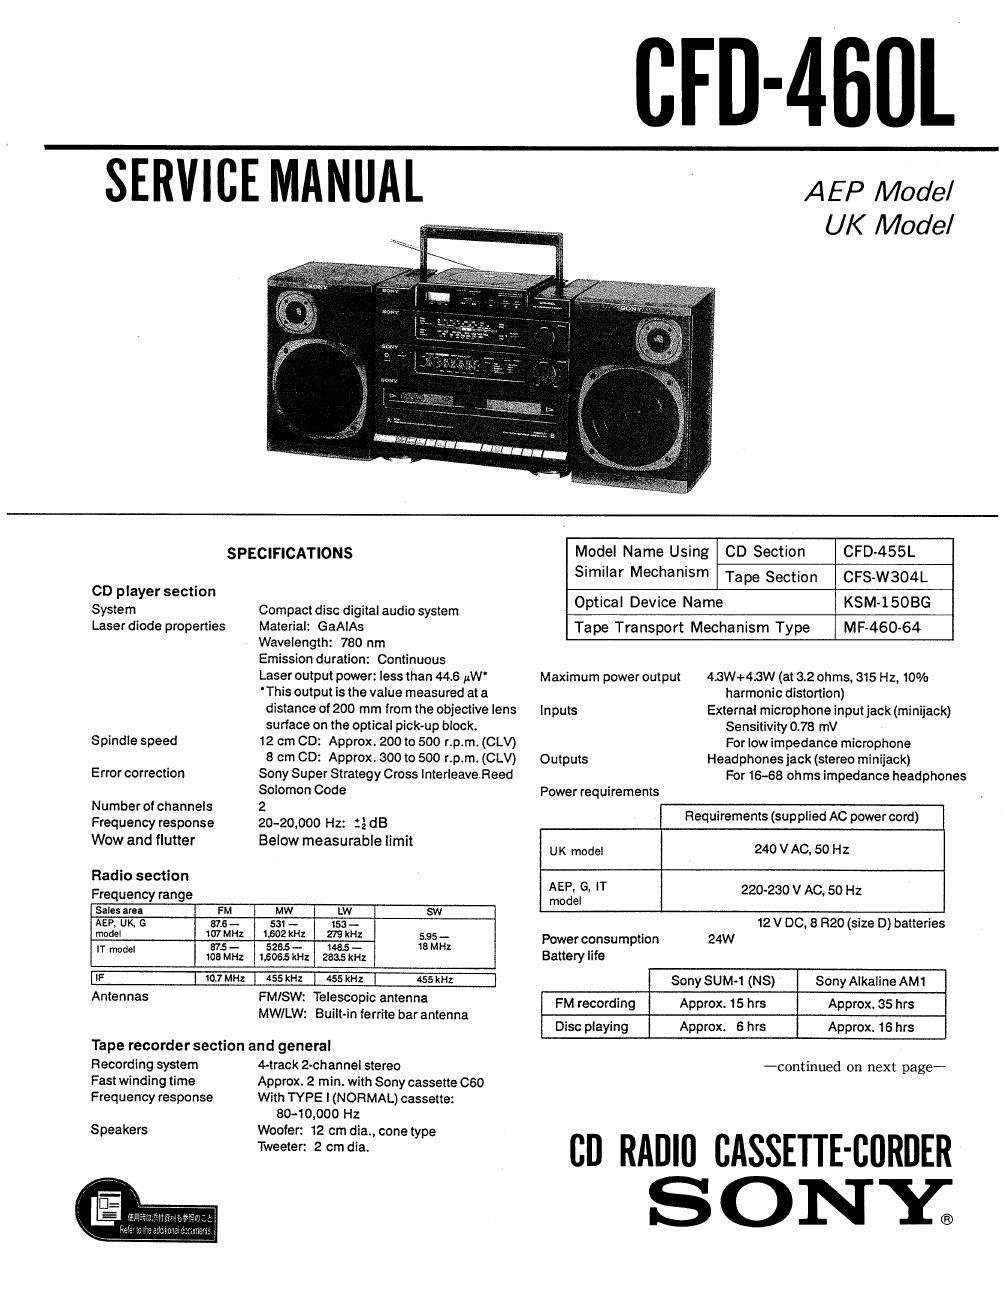 sony cfd 460 l service manual